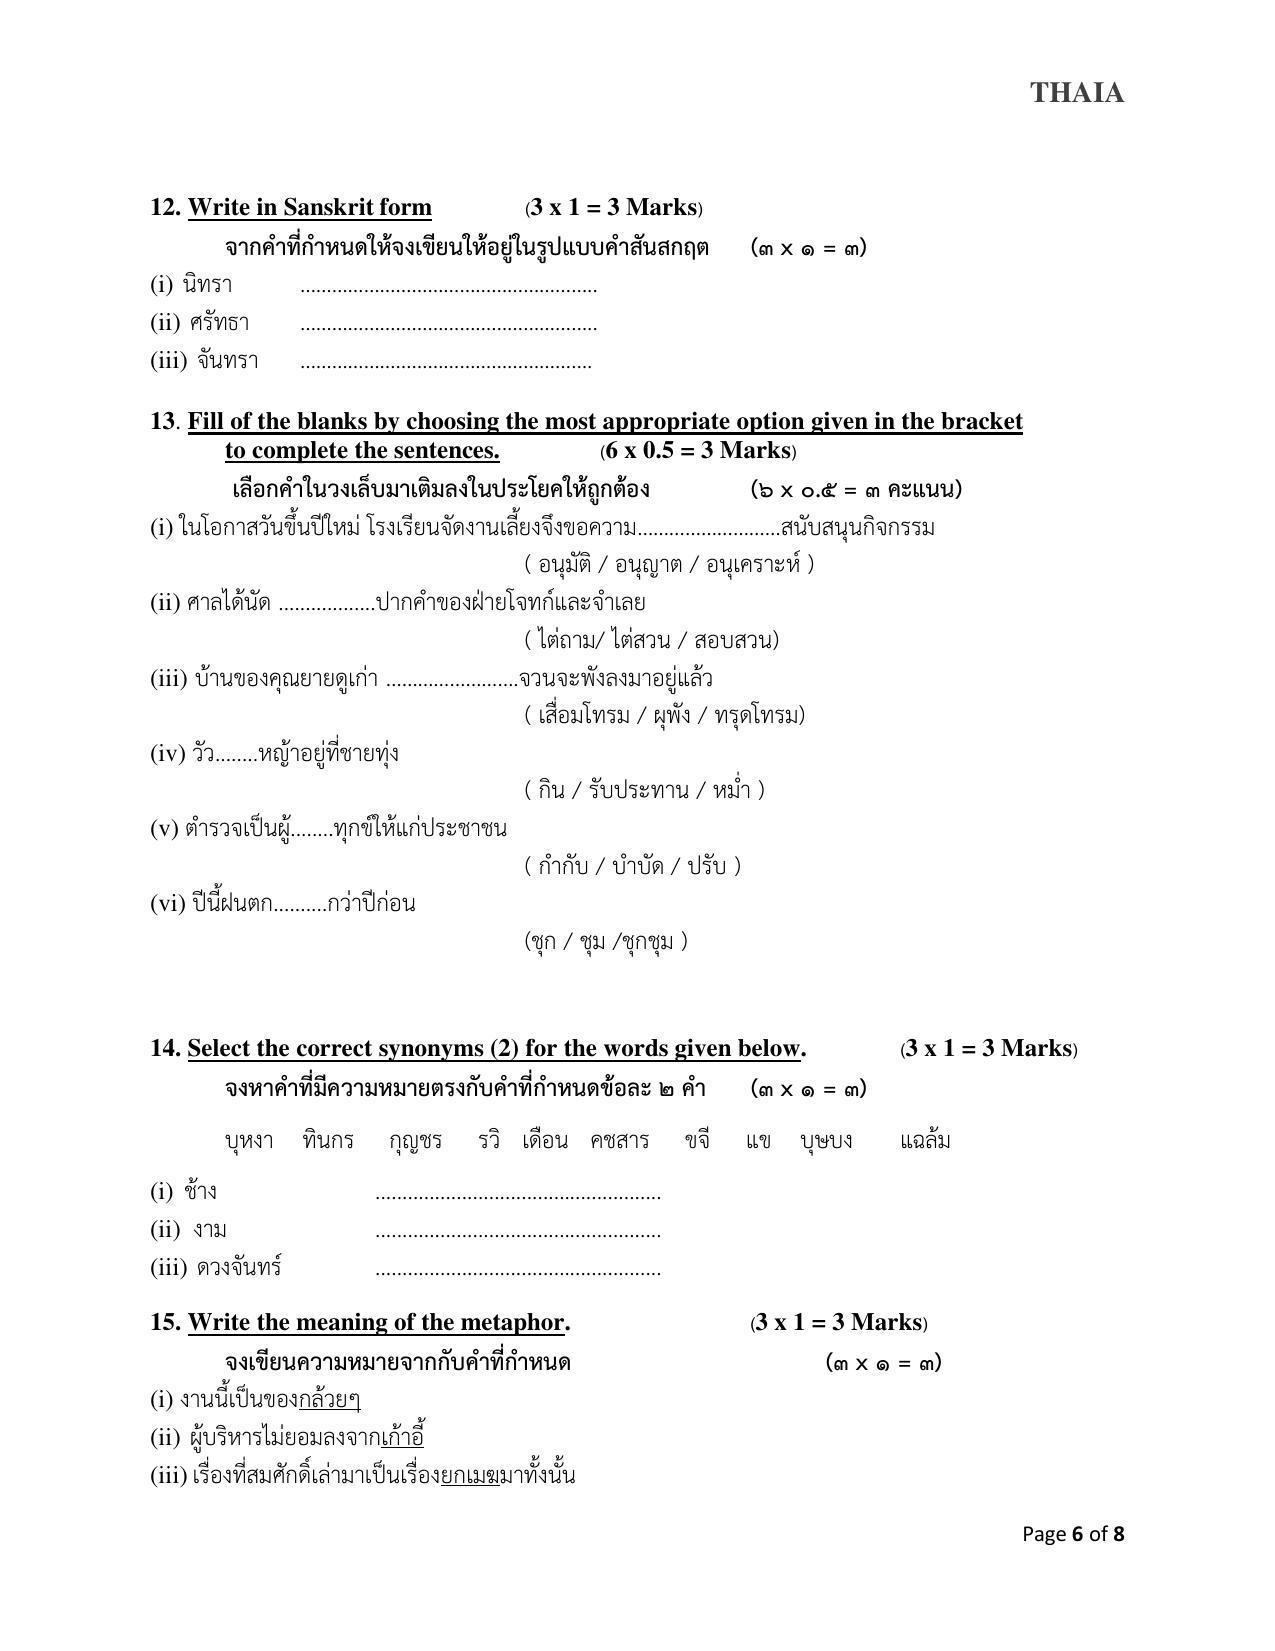 CBSE Class 10 Thai Sample Papers 2023 - Page 6